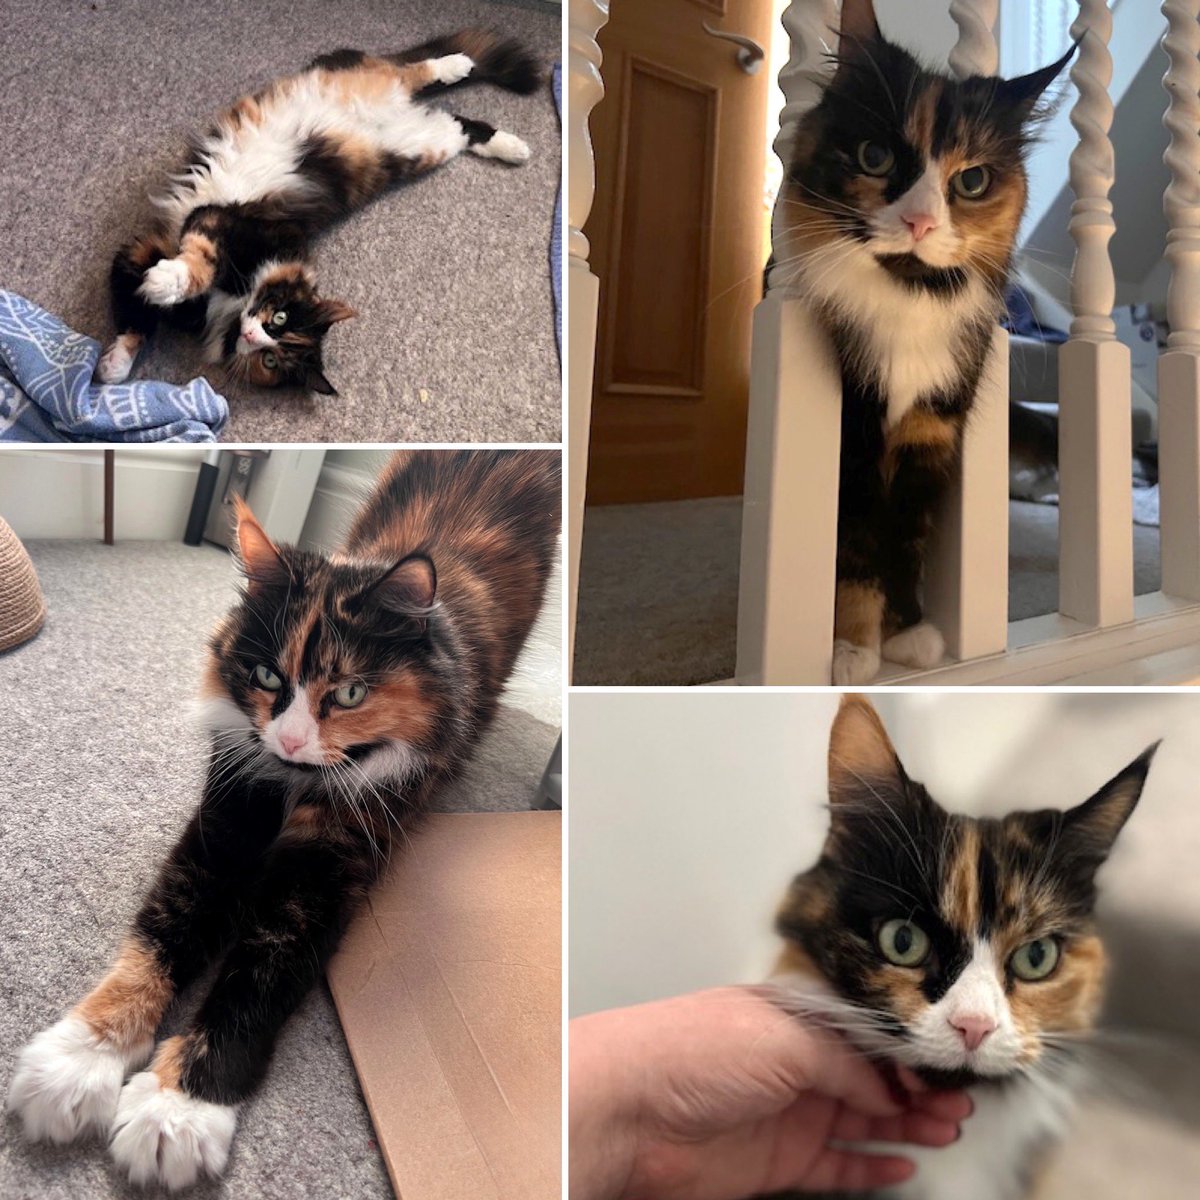 Here she is…. Poppy at home.

“She’s starting to settle well, especially upstairs! Still a bit timid about going downstairs!”

#HereForTheCats however long it takes 💜 

Thank you for sharing #CatsOnTwitter 😽

#CatsProtection #CatsAreFamily #CatsOnX #FridayFeline #Friday